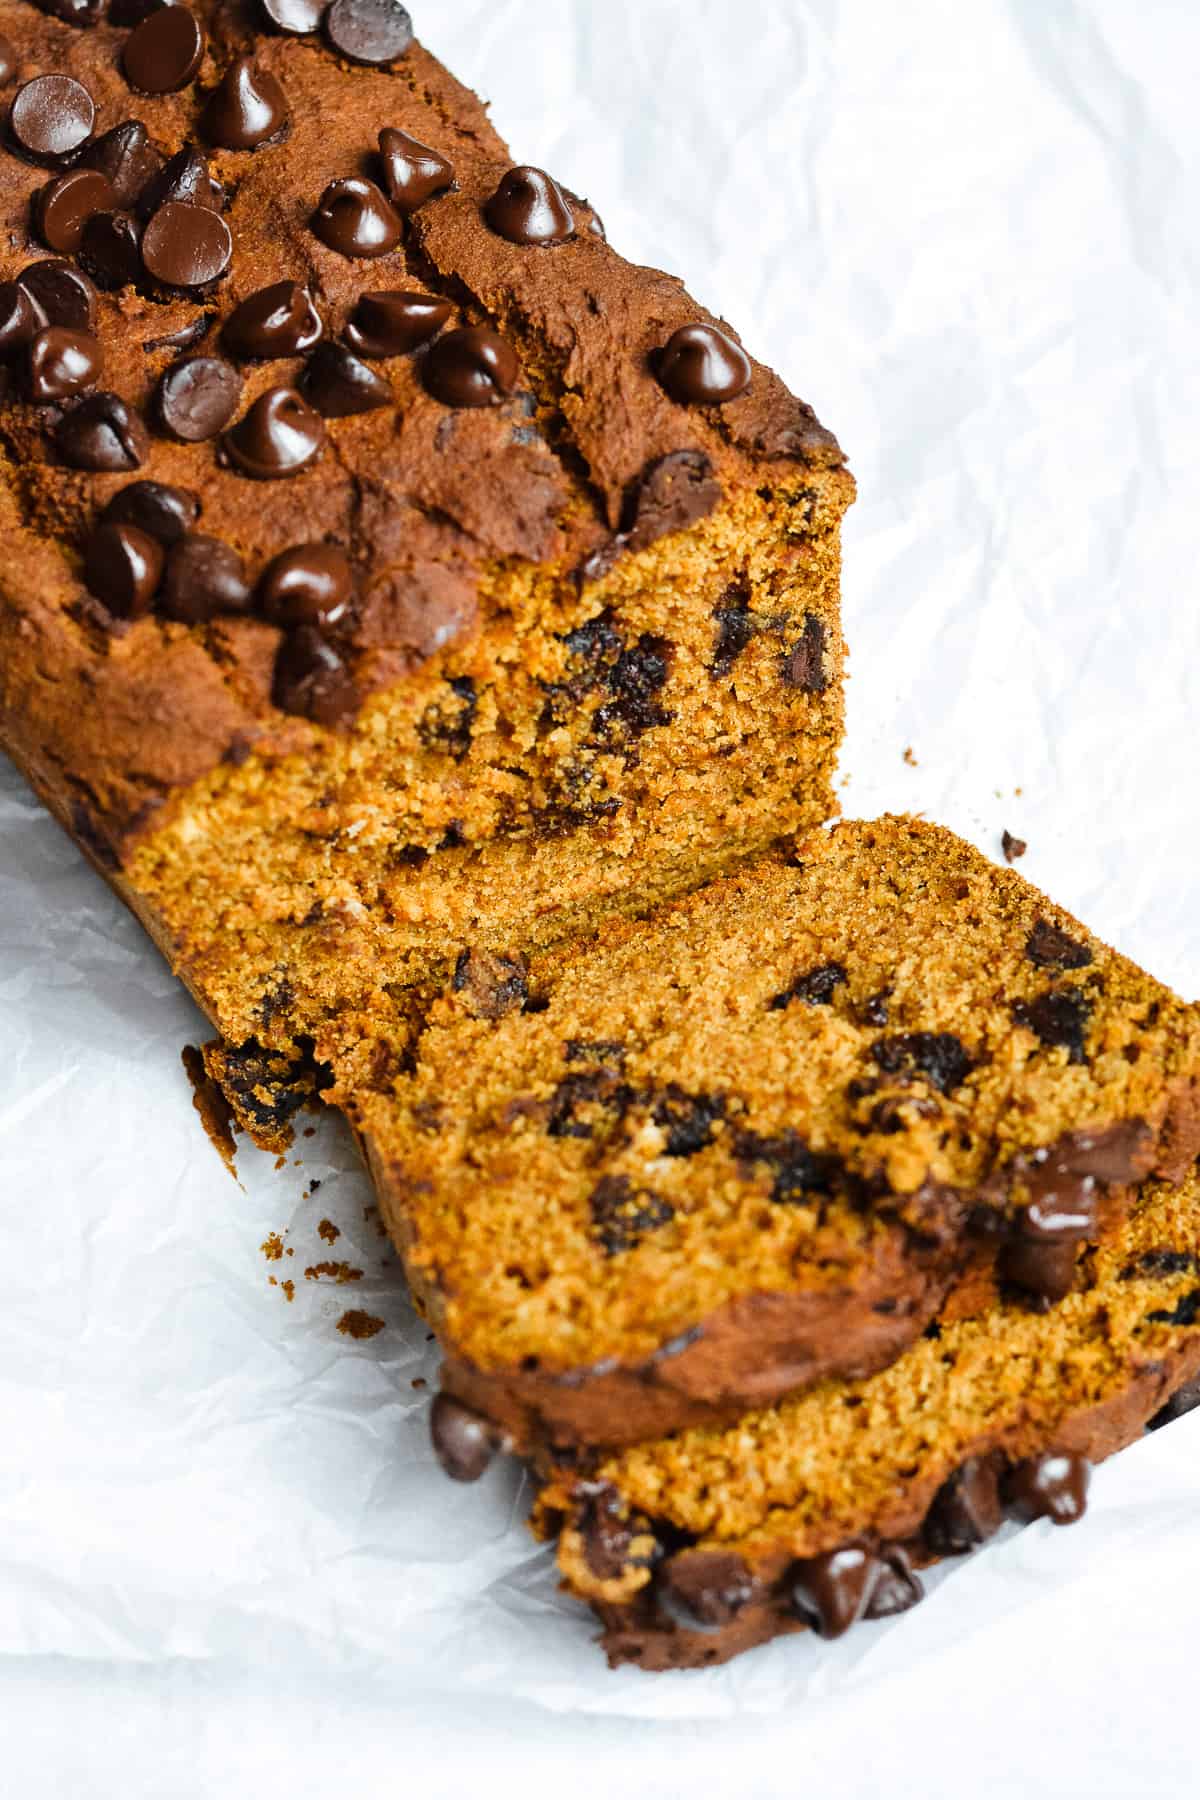 Pumpkin bread with chocolate chips and slices.